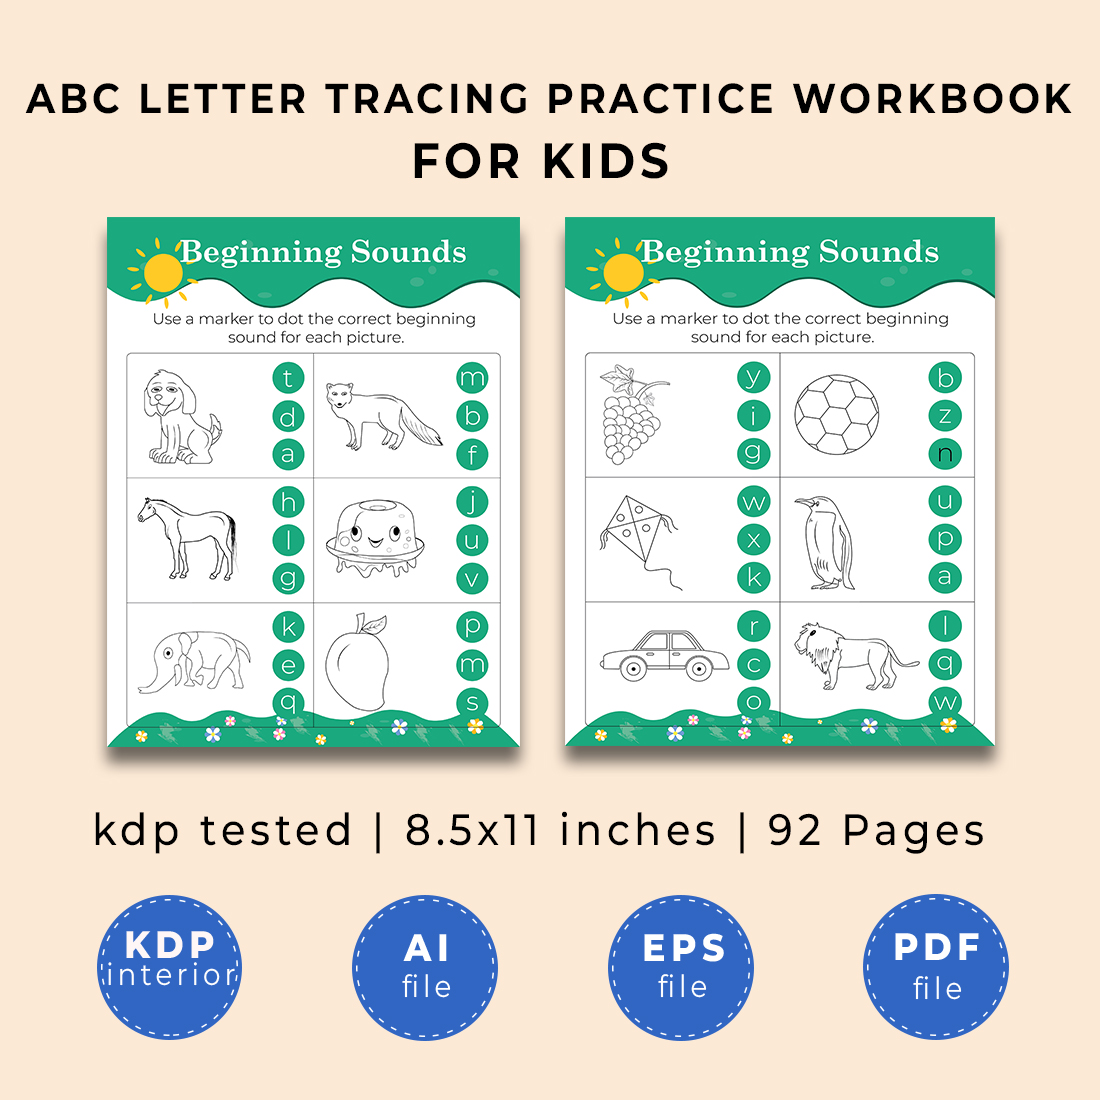 ABC Alphabet Letter Tracing Practice Workbook For Kids preview image.